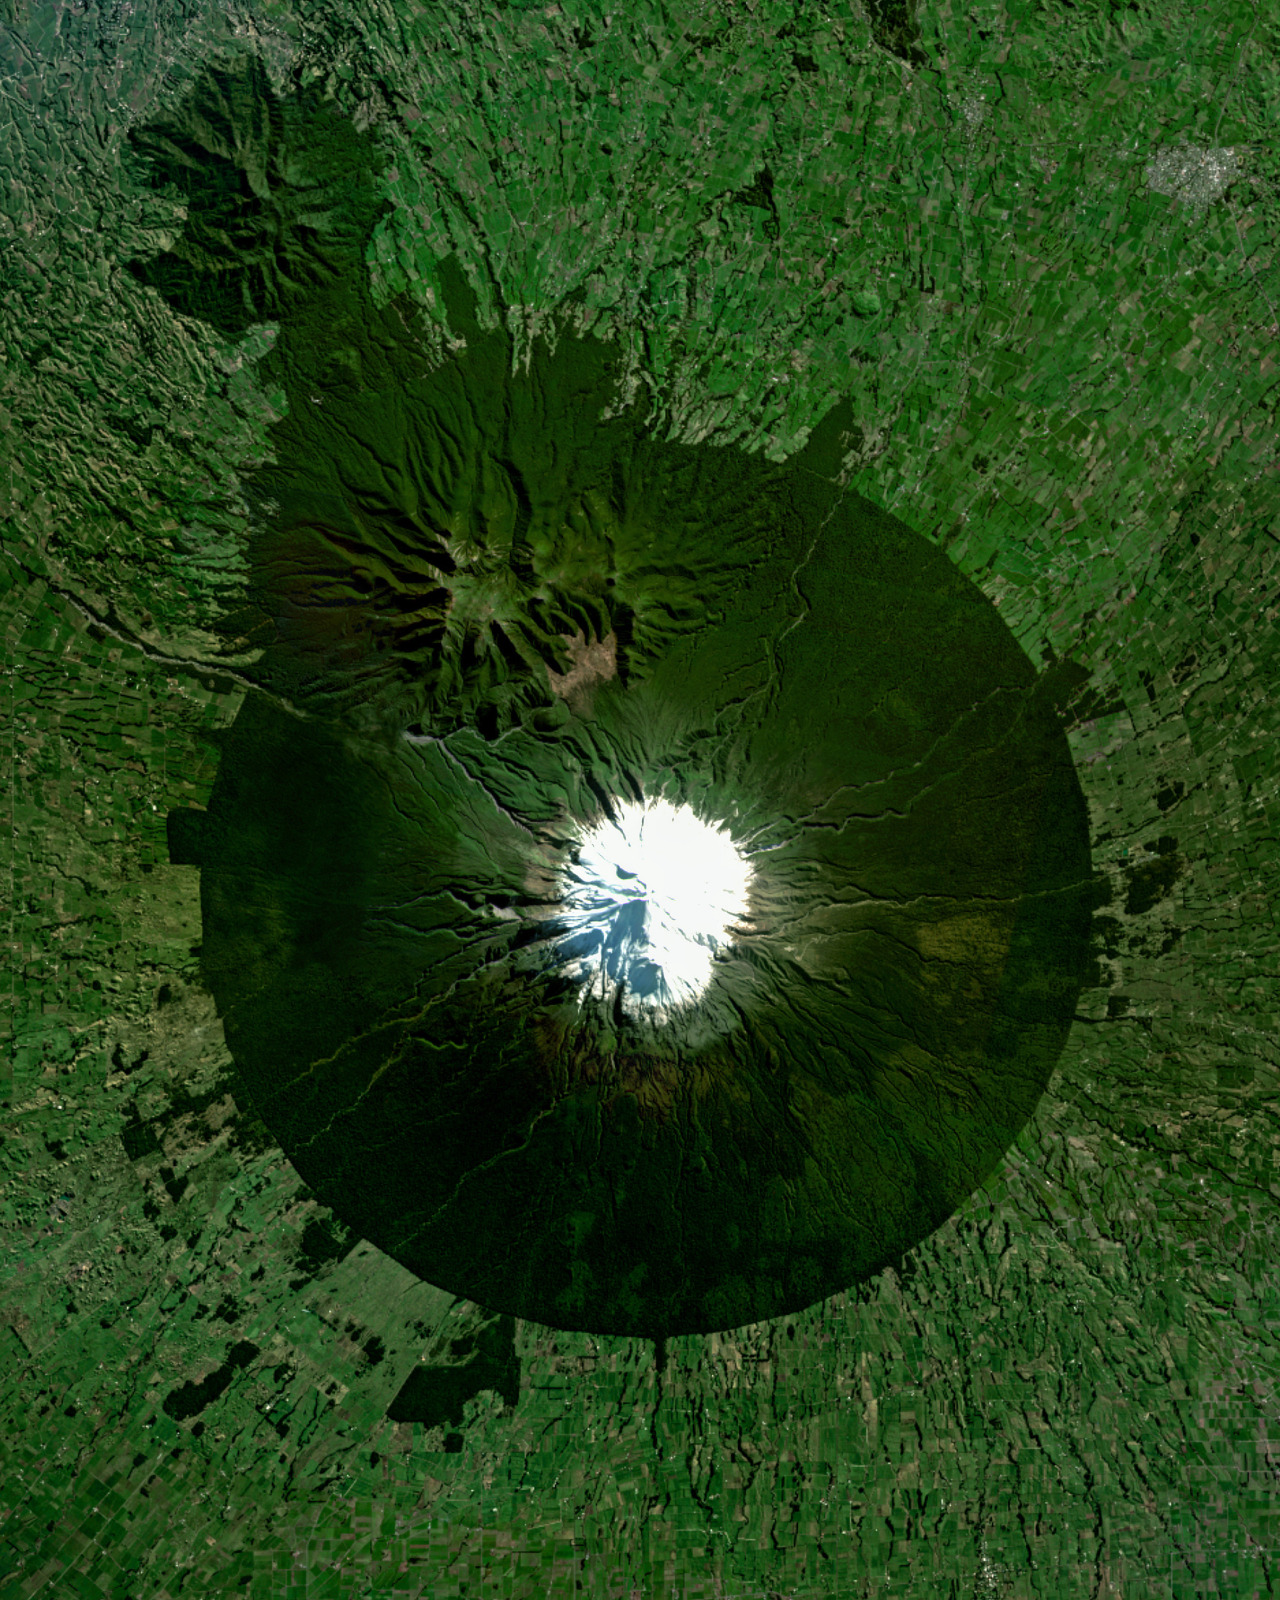 dailyoverview:Mount Taranaki, also known as Mount Egmont, is an active ...